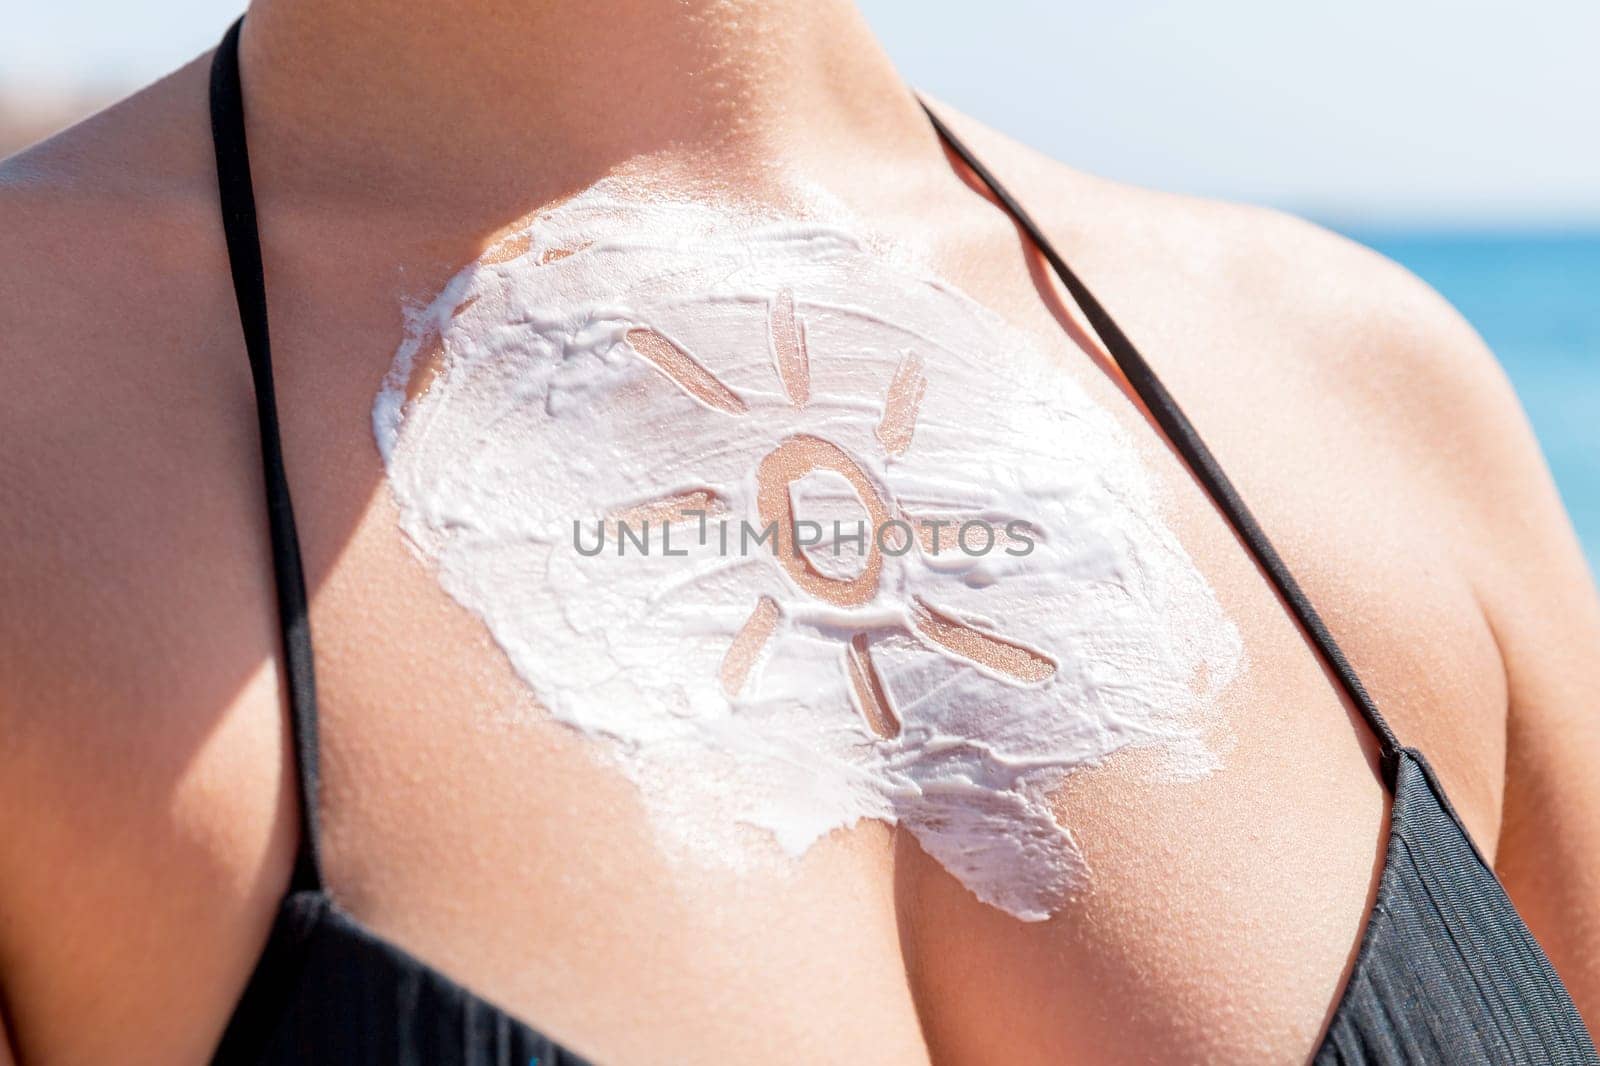 Sun shaped sunscreen on woman's breast over sea background by Snegok1967